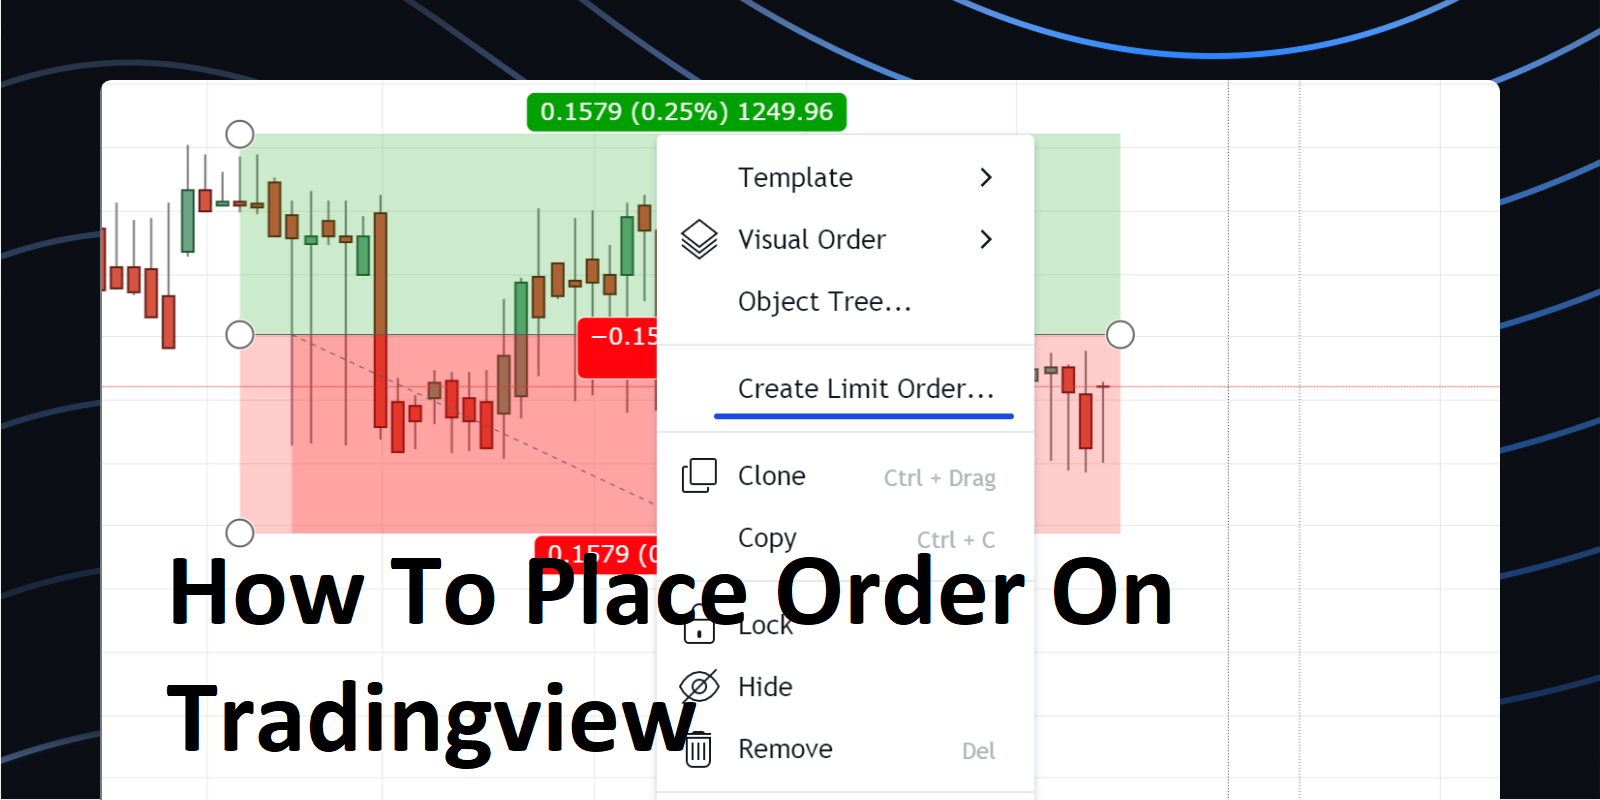 How To Place Order On Tradingview